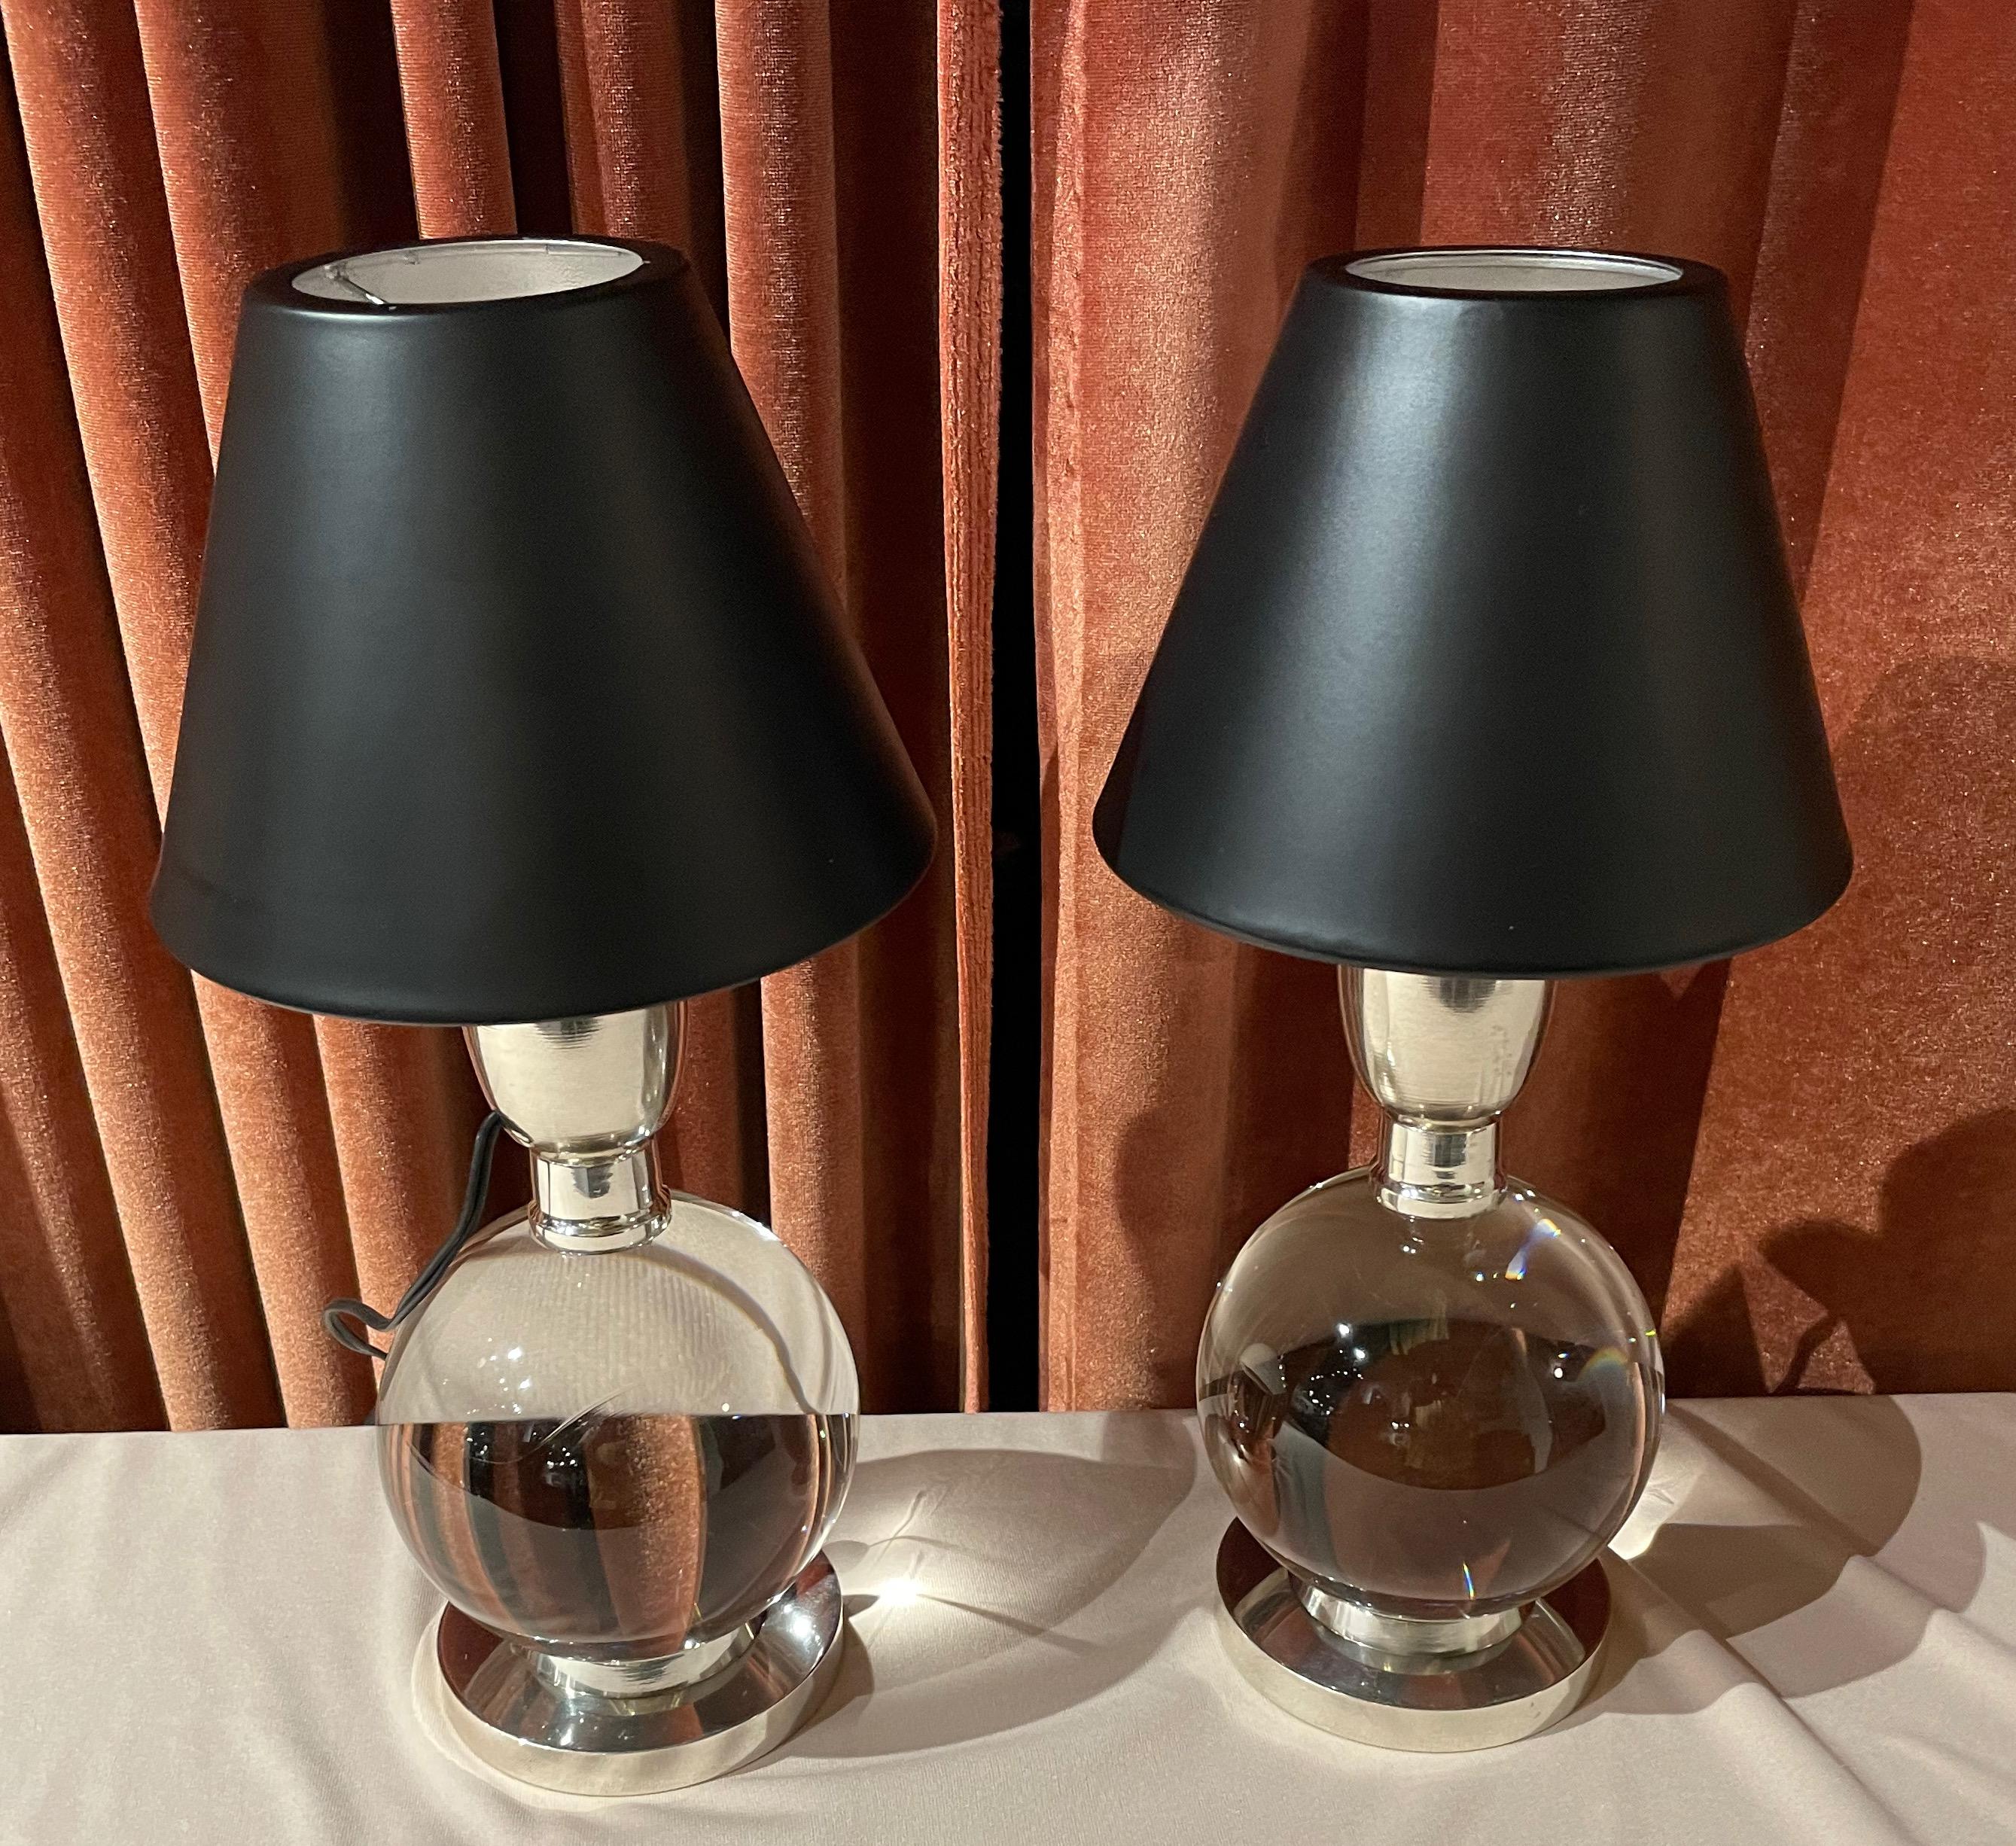 Rare pair of Jacques Adnet lamps made with Baccarat crystal and a nickel base. The balls can be moved to different positions. These lamps are from the 1940s and are documented in the Adnet book (model 7706). This particular pair is in exceptional